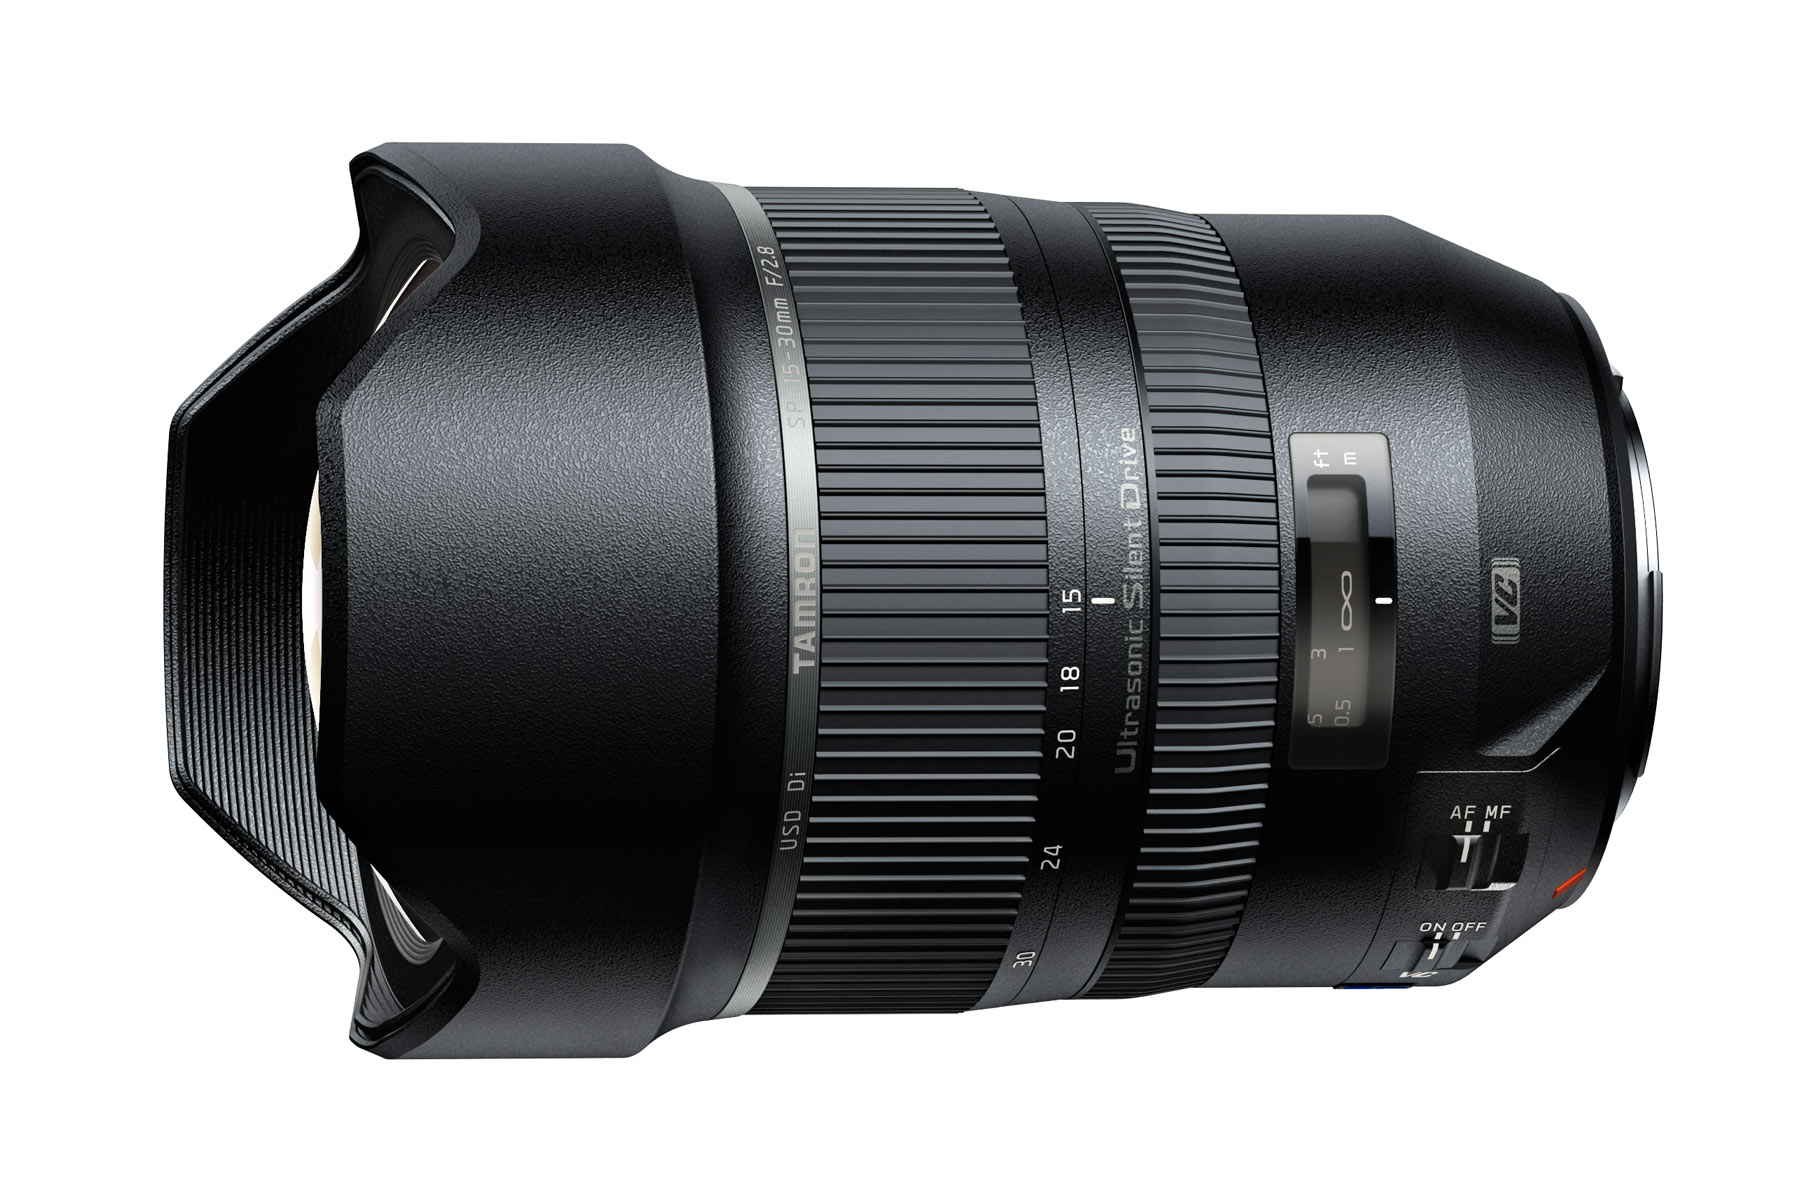 The Tamron SP 15-30mm F2.8 Di VC USD (model A012) is geared for full-frame shooters who appreciate a fast aperture and image stabilization.